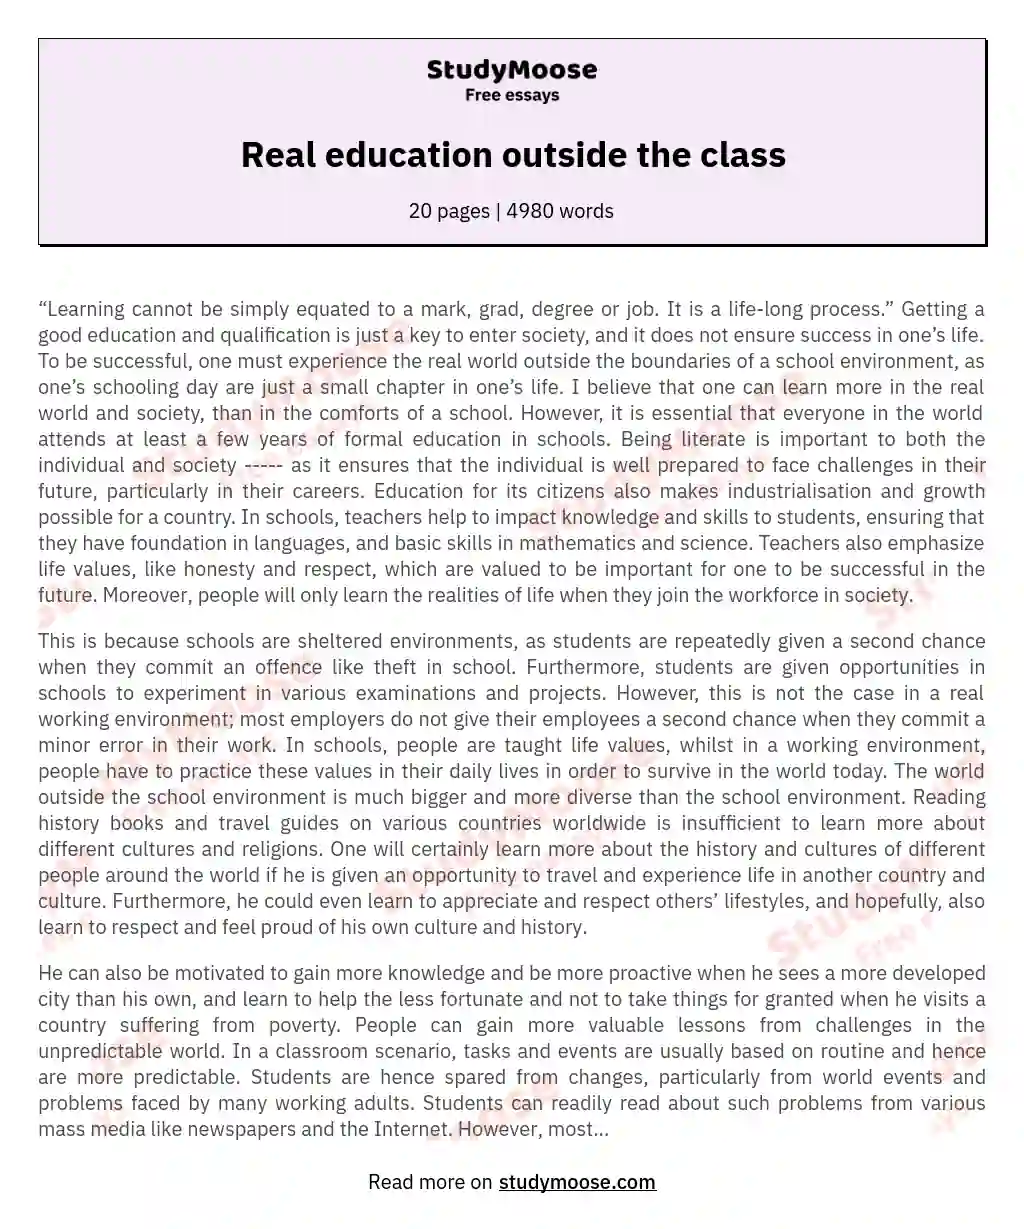 Real education outside the class essay